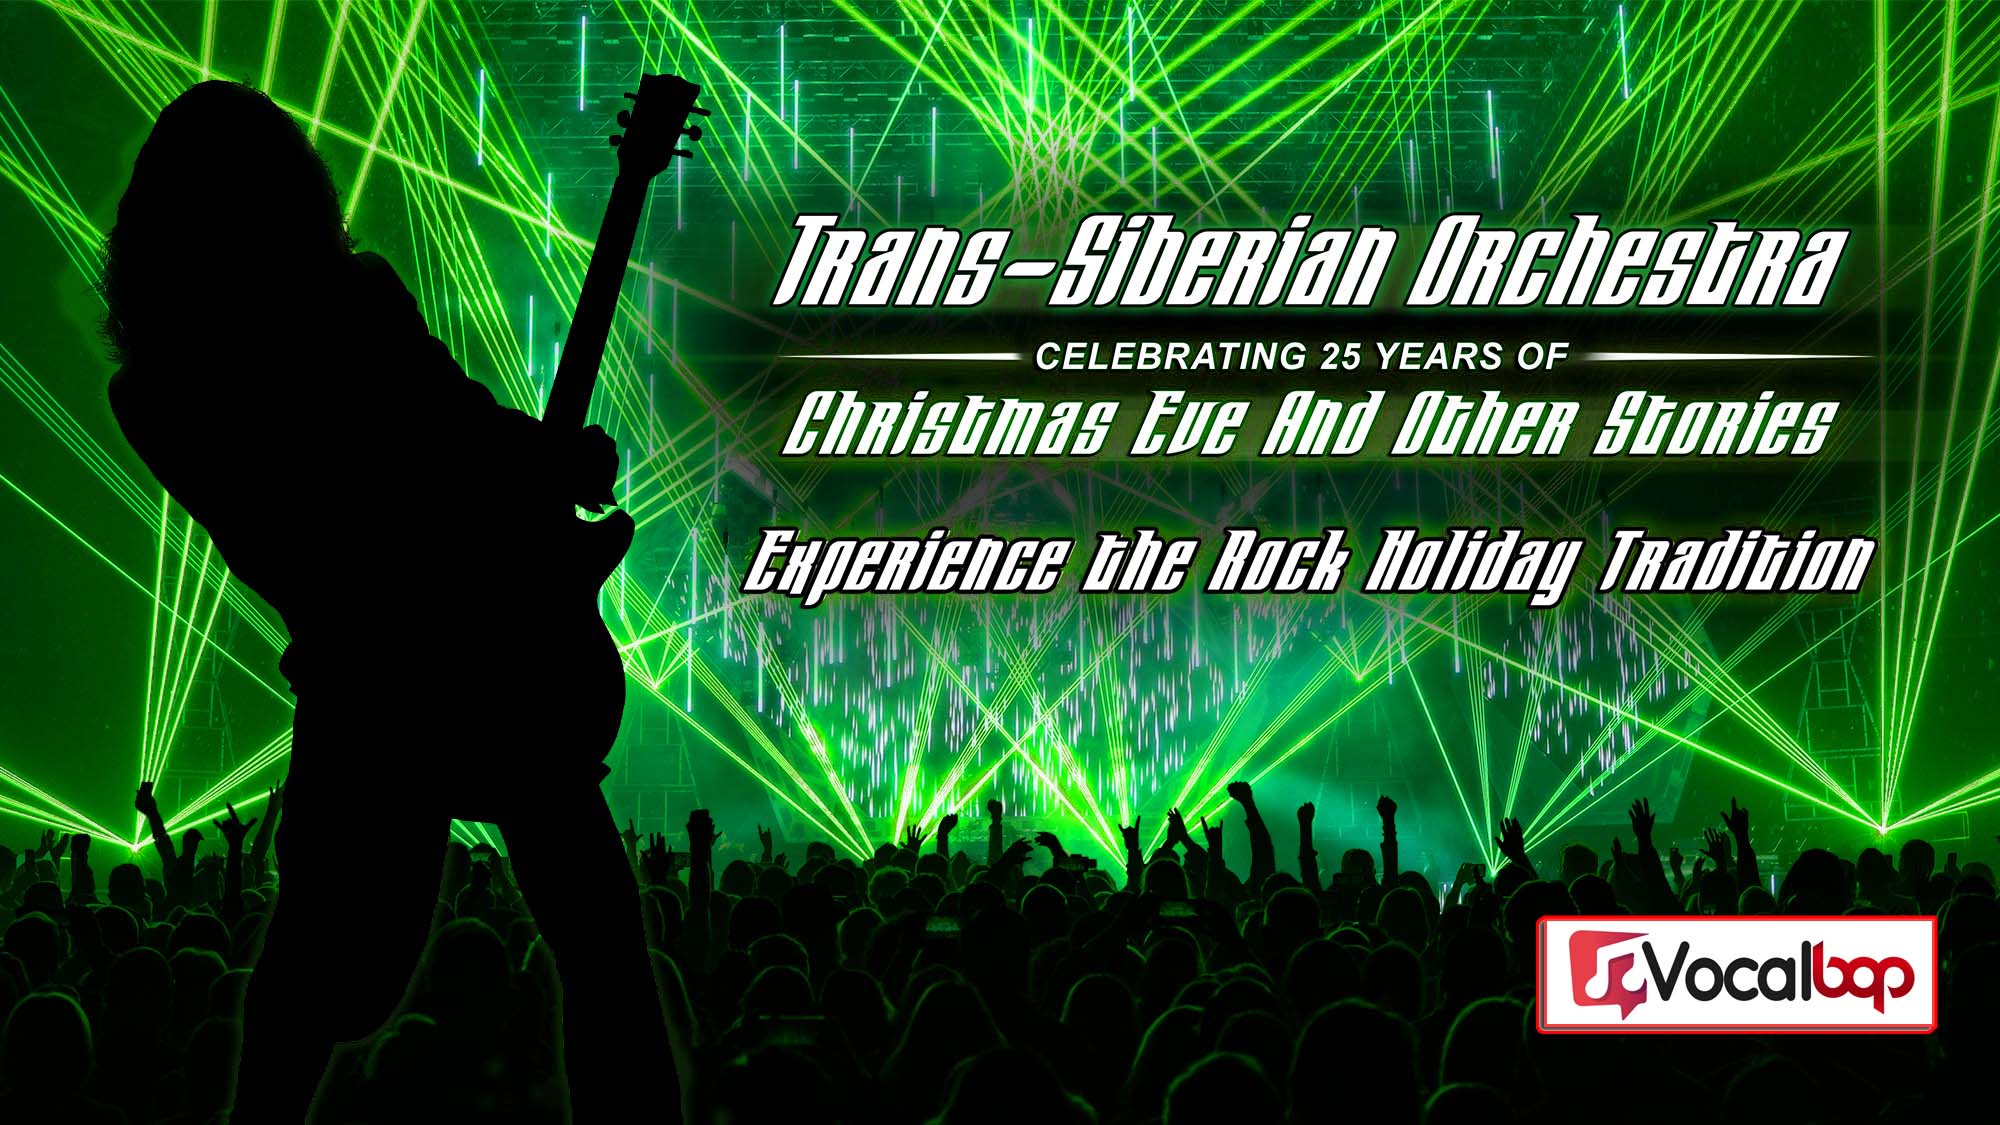 How to Get Trans-Siberian Orchestra Tour Tickets : 2021- 2022 Dates